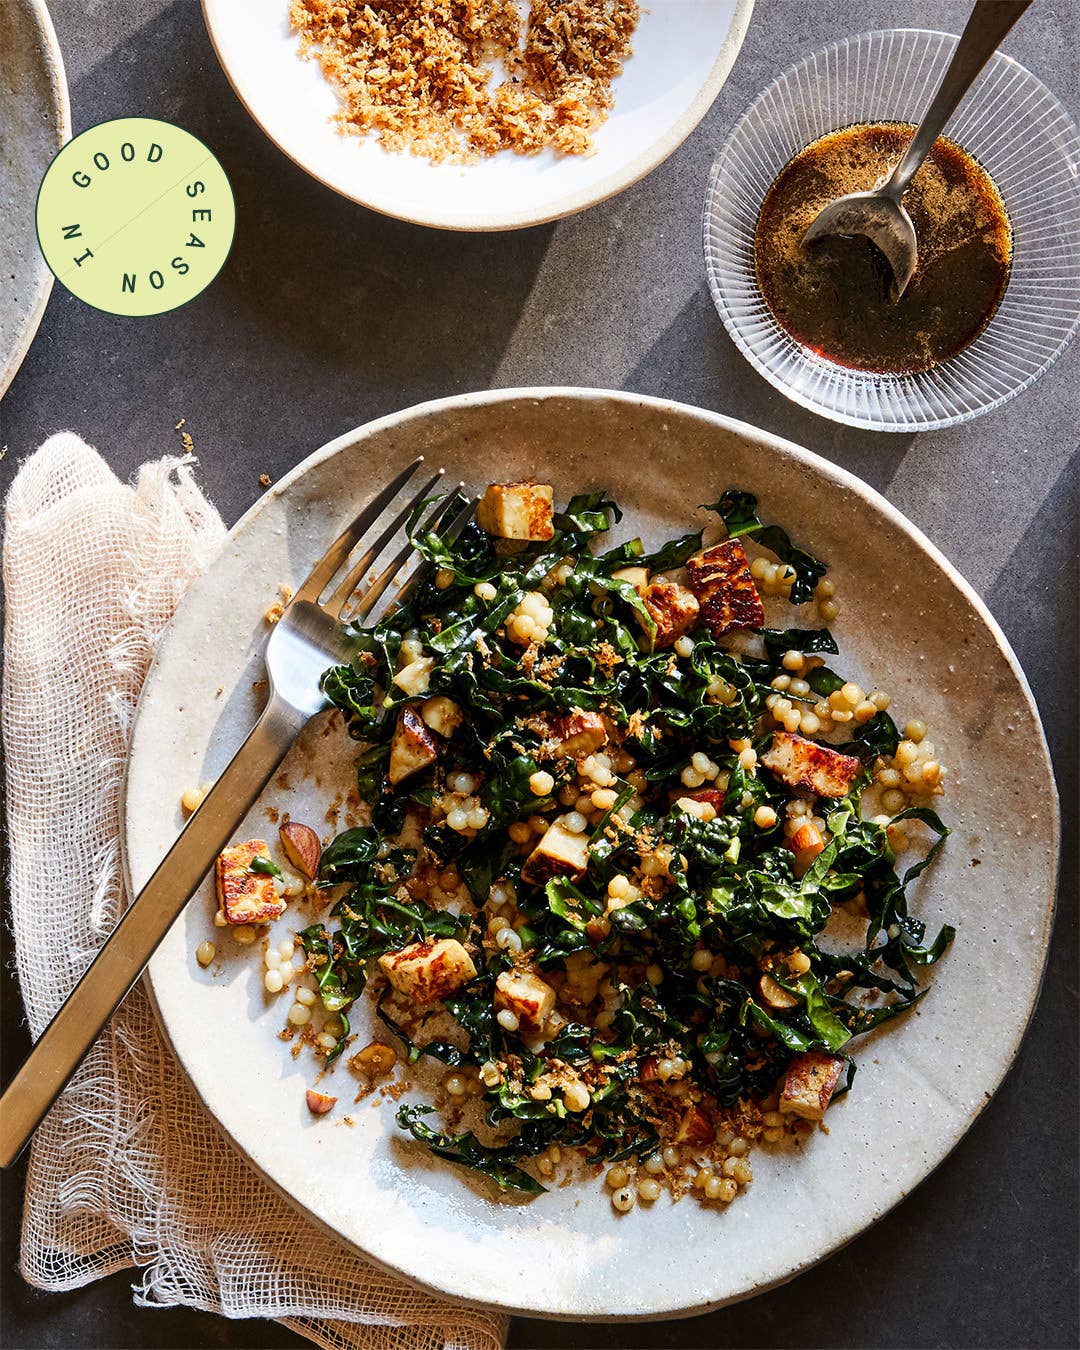 Pearled Couscous Salad with Kale, Halloumi, and Za’atar.